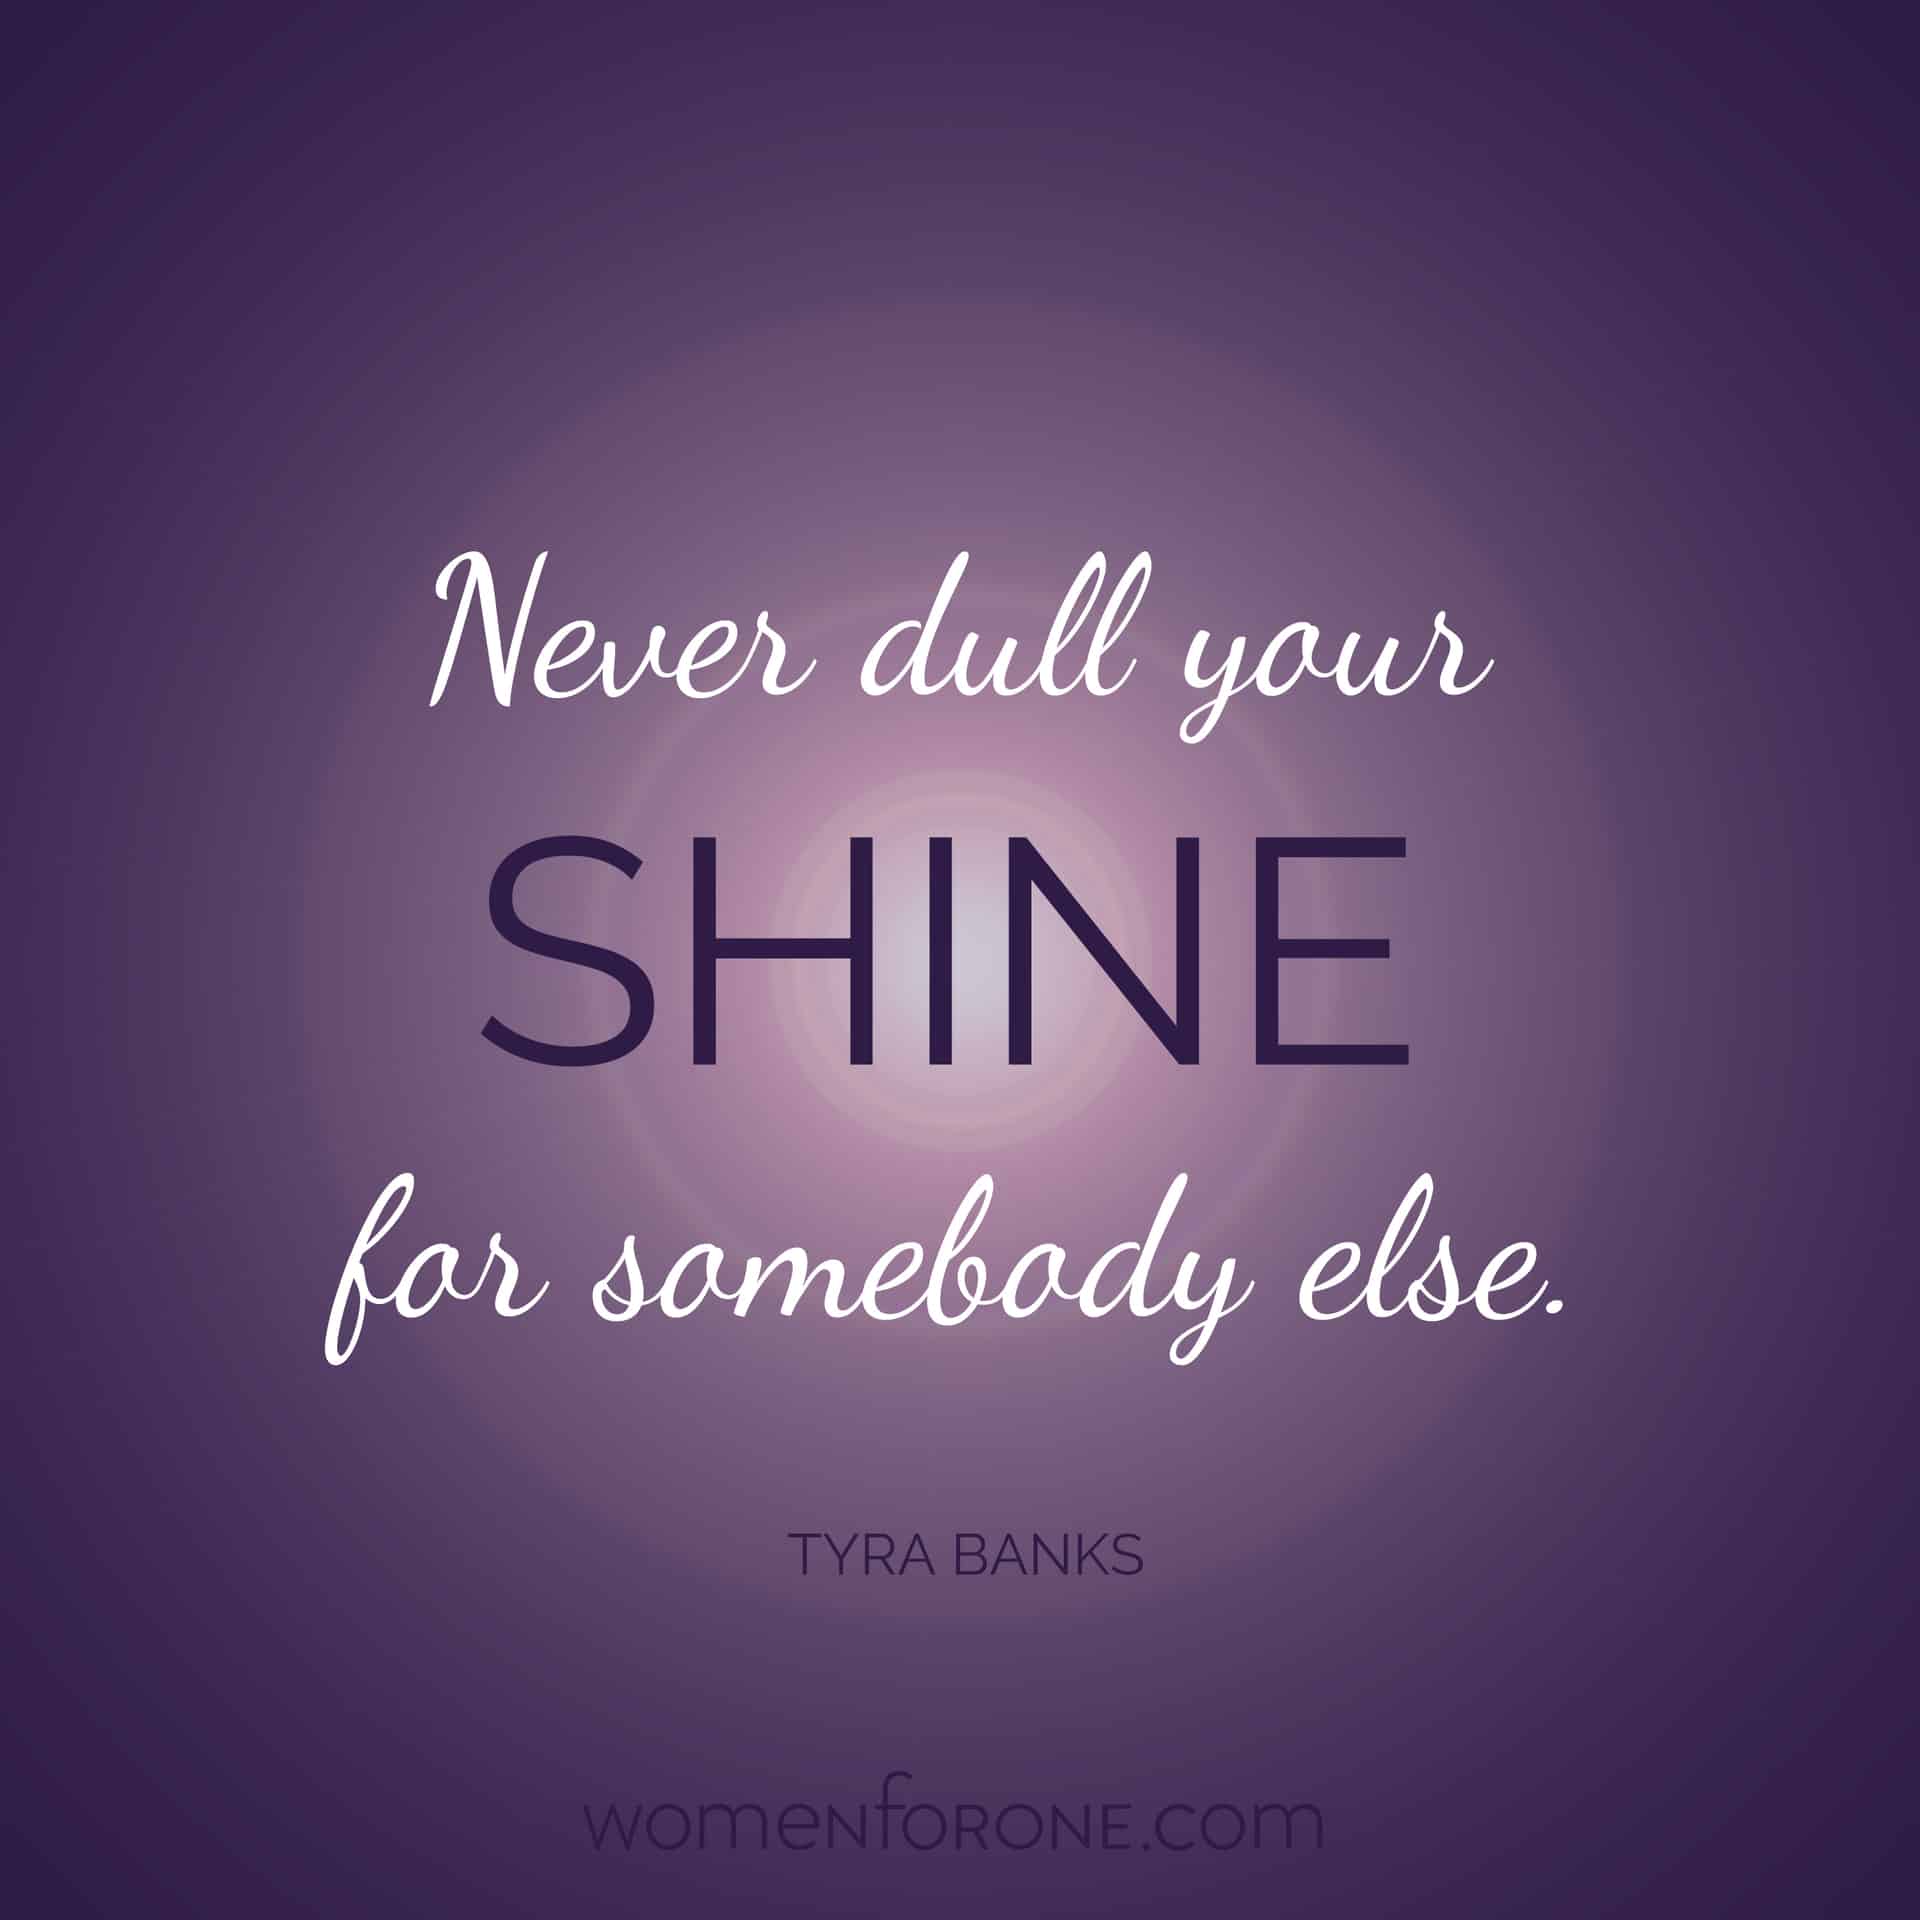 Never dull your shine for somebody else. - Tyra Banks